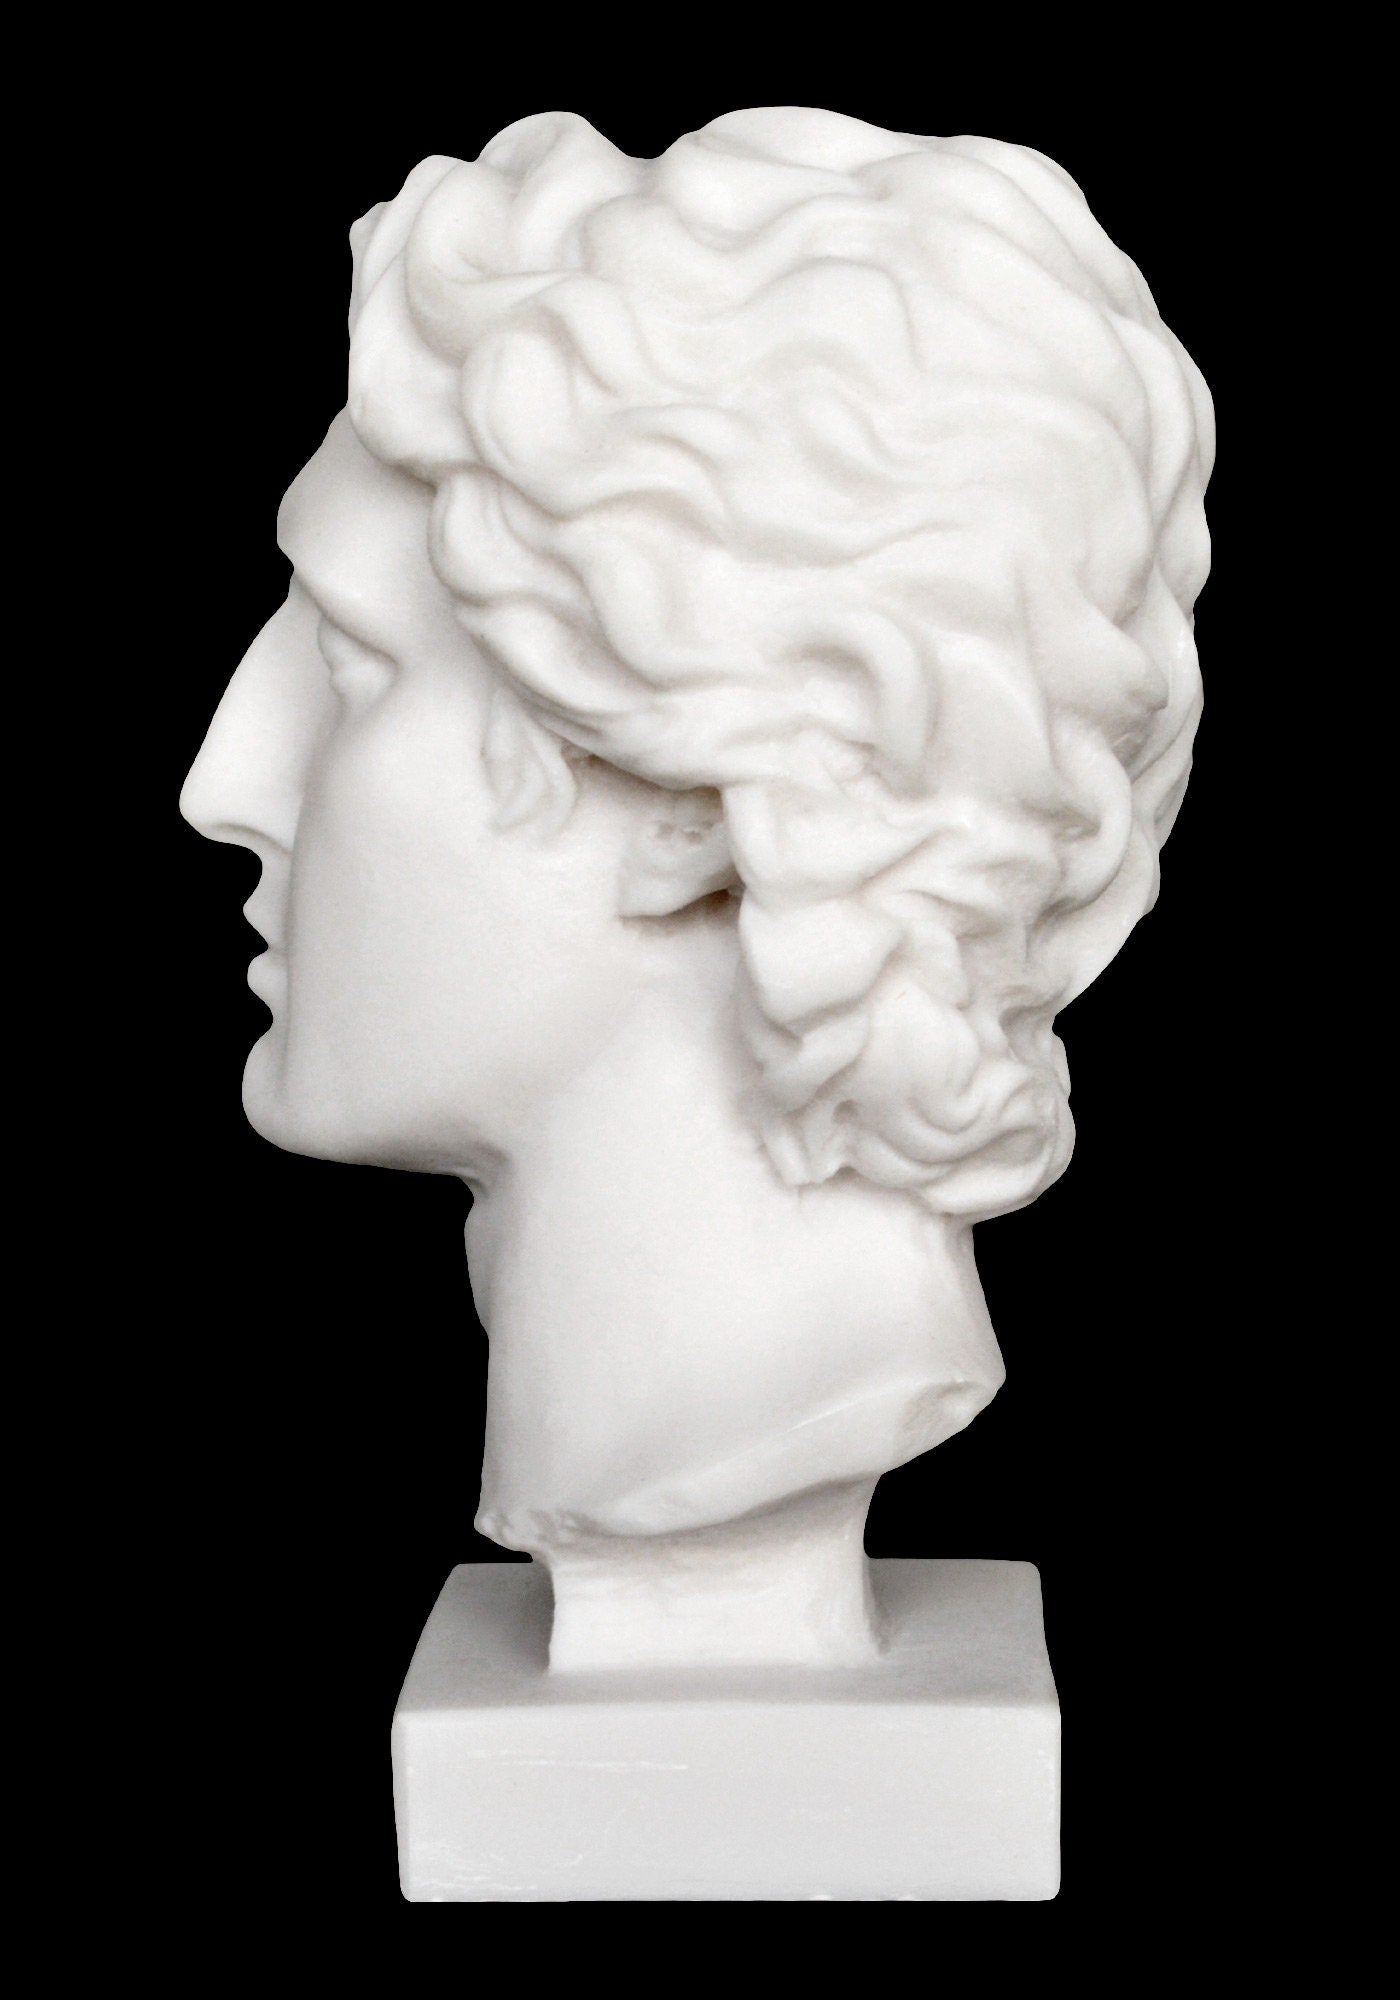 Alexander the Great - King of Macedon - 356–323 BC - Son of Philip - Visionary Leader - Alabaster Bust Sculpture